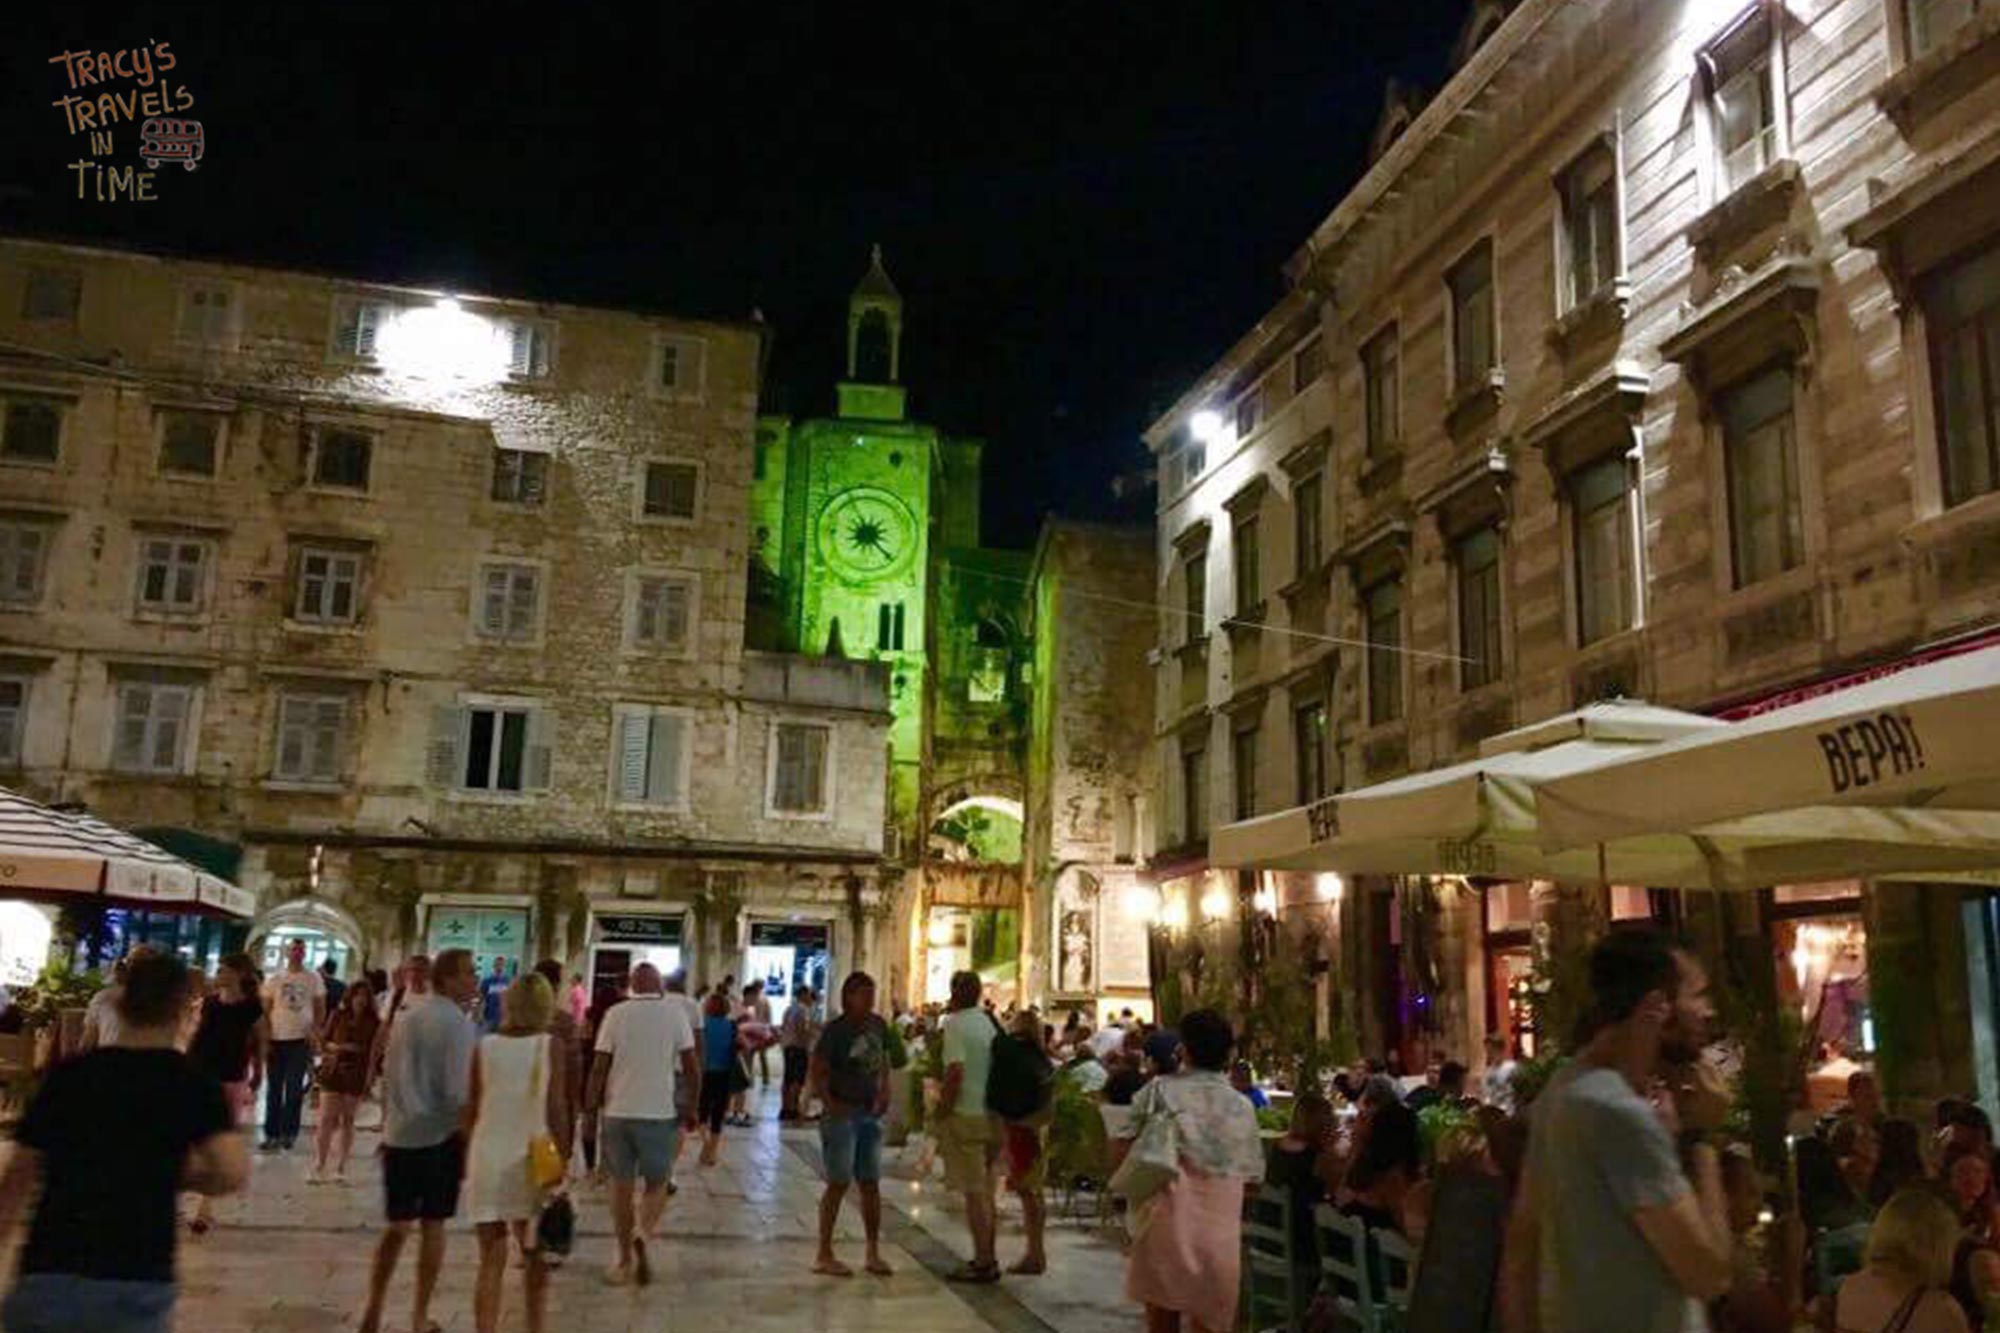 Split, Croatia. Enjoy an evening promenade and soak up the atmosphere of this historic site